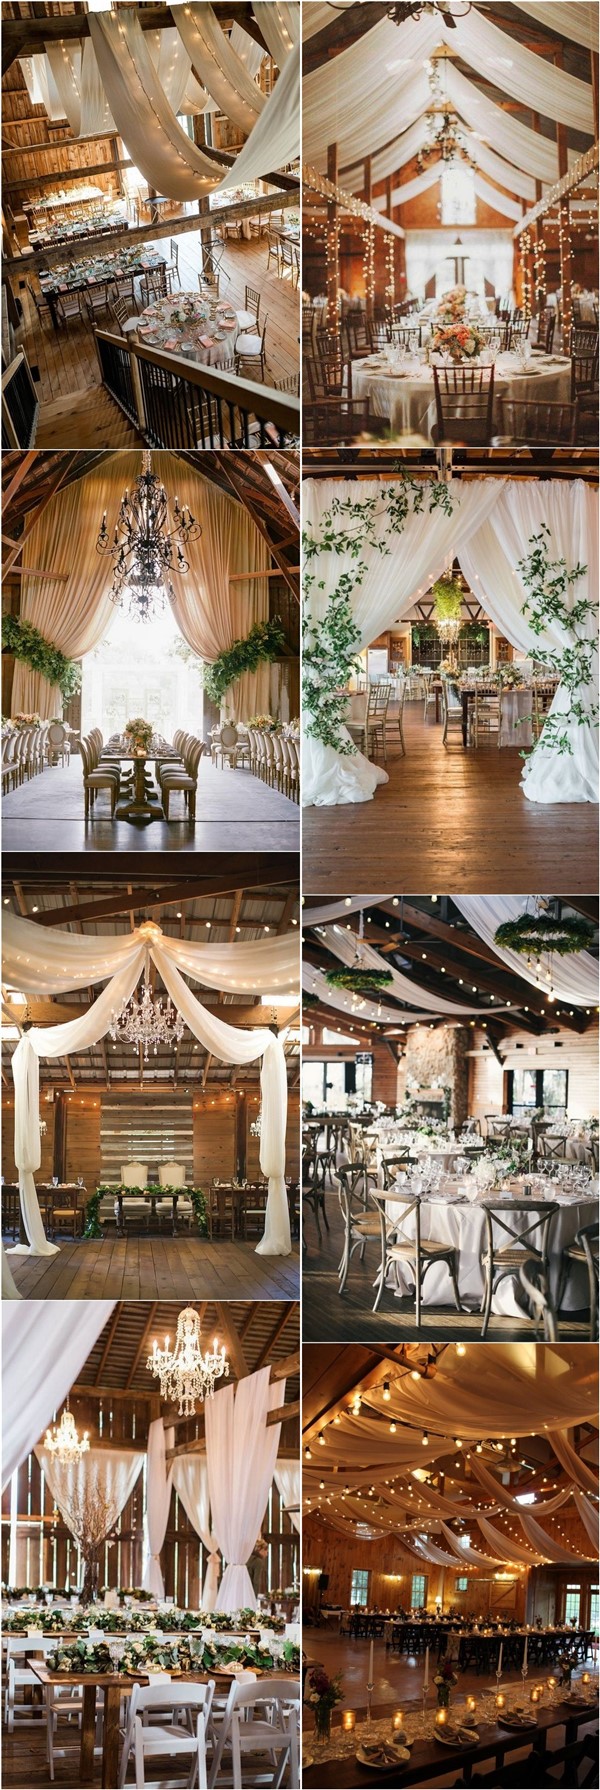 rustic country barn wedding reception ideas with draping4